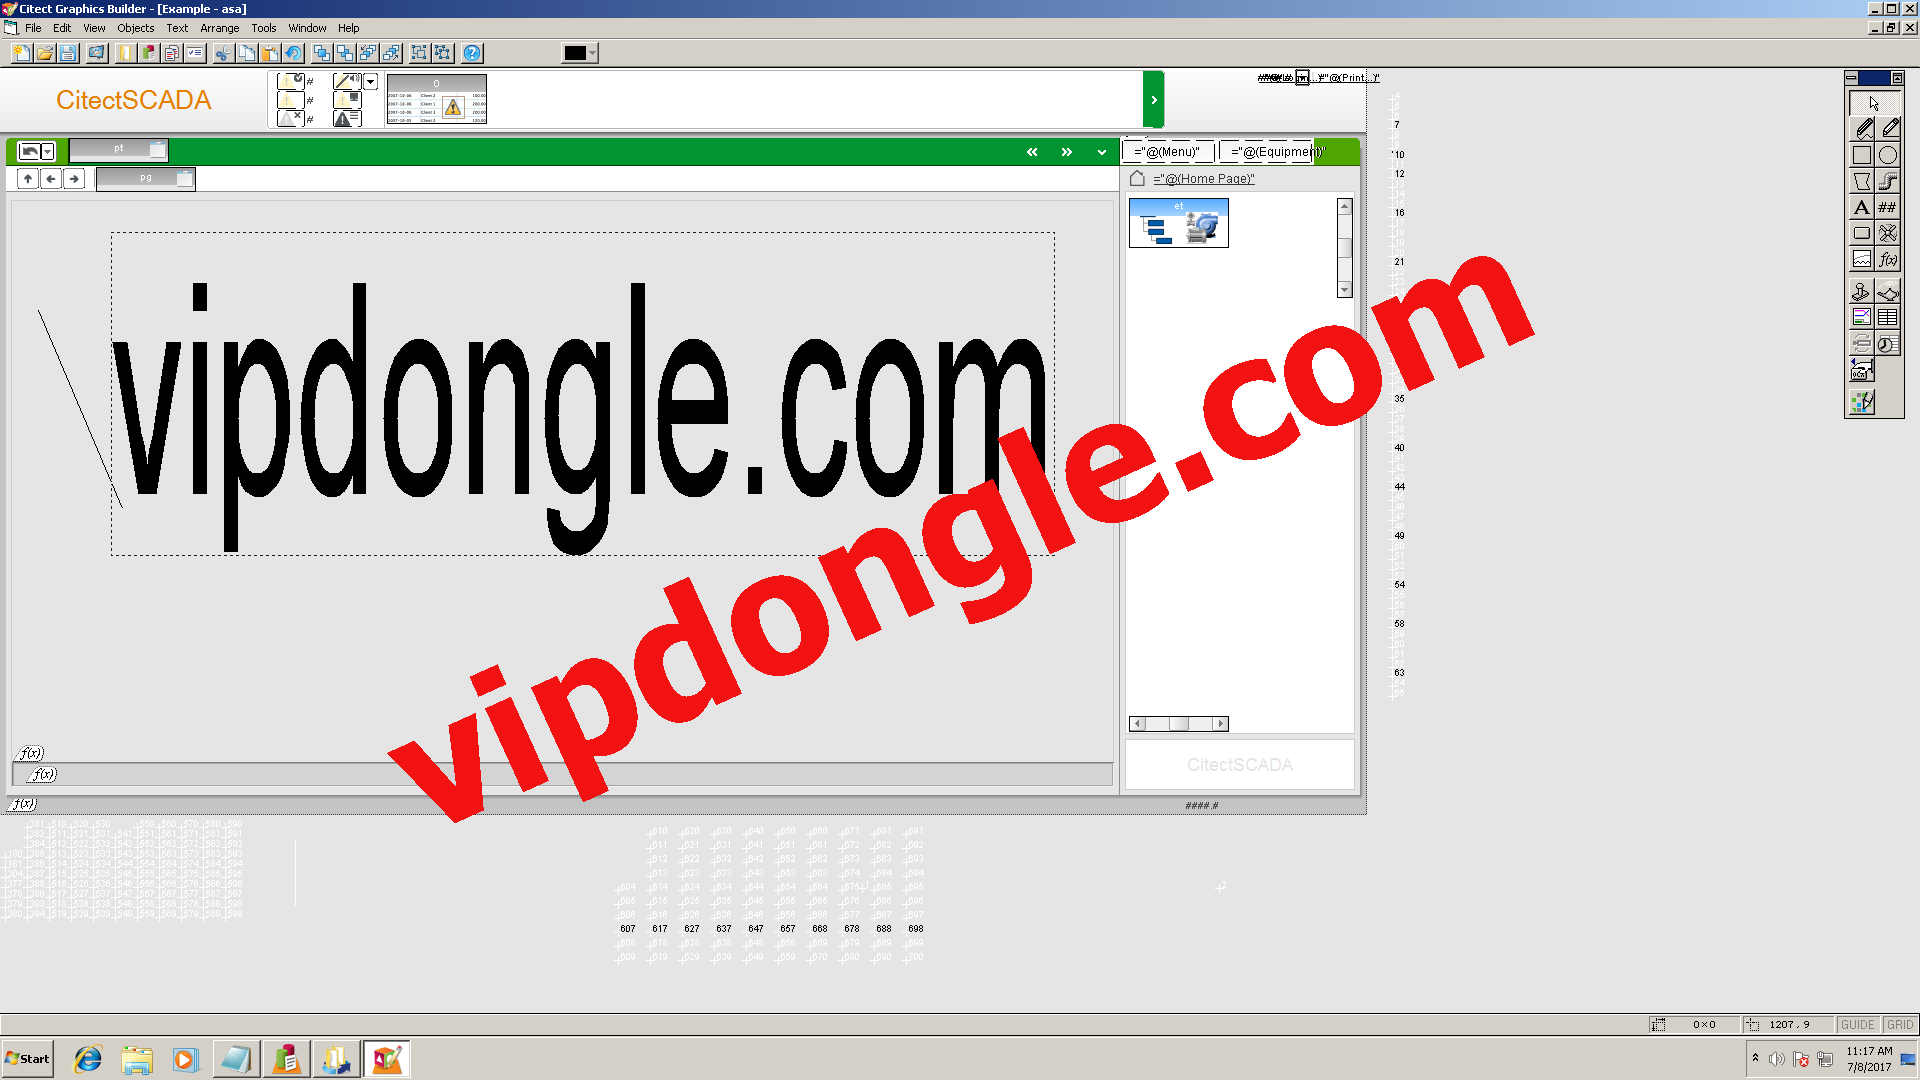 sentinel dongle driver download